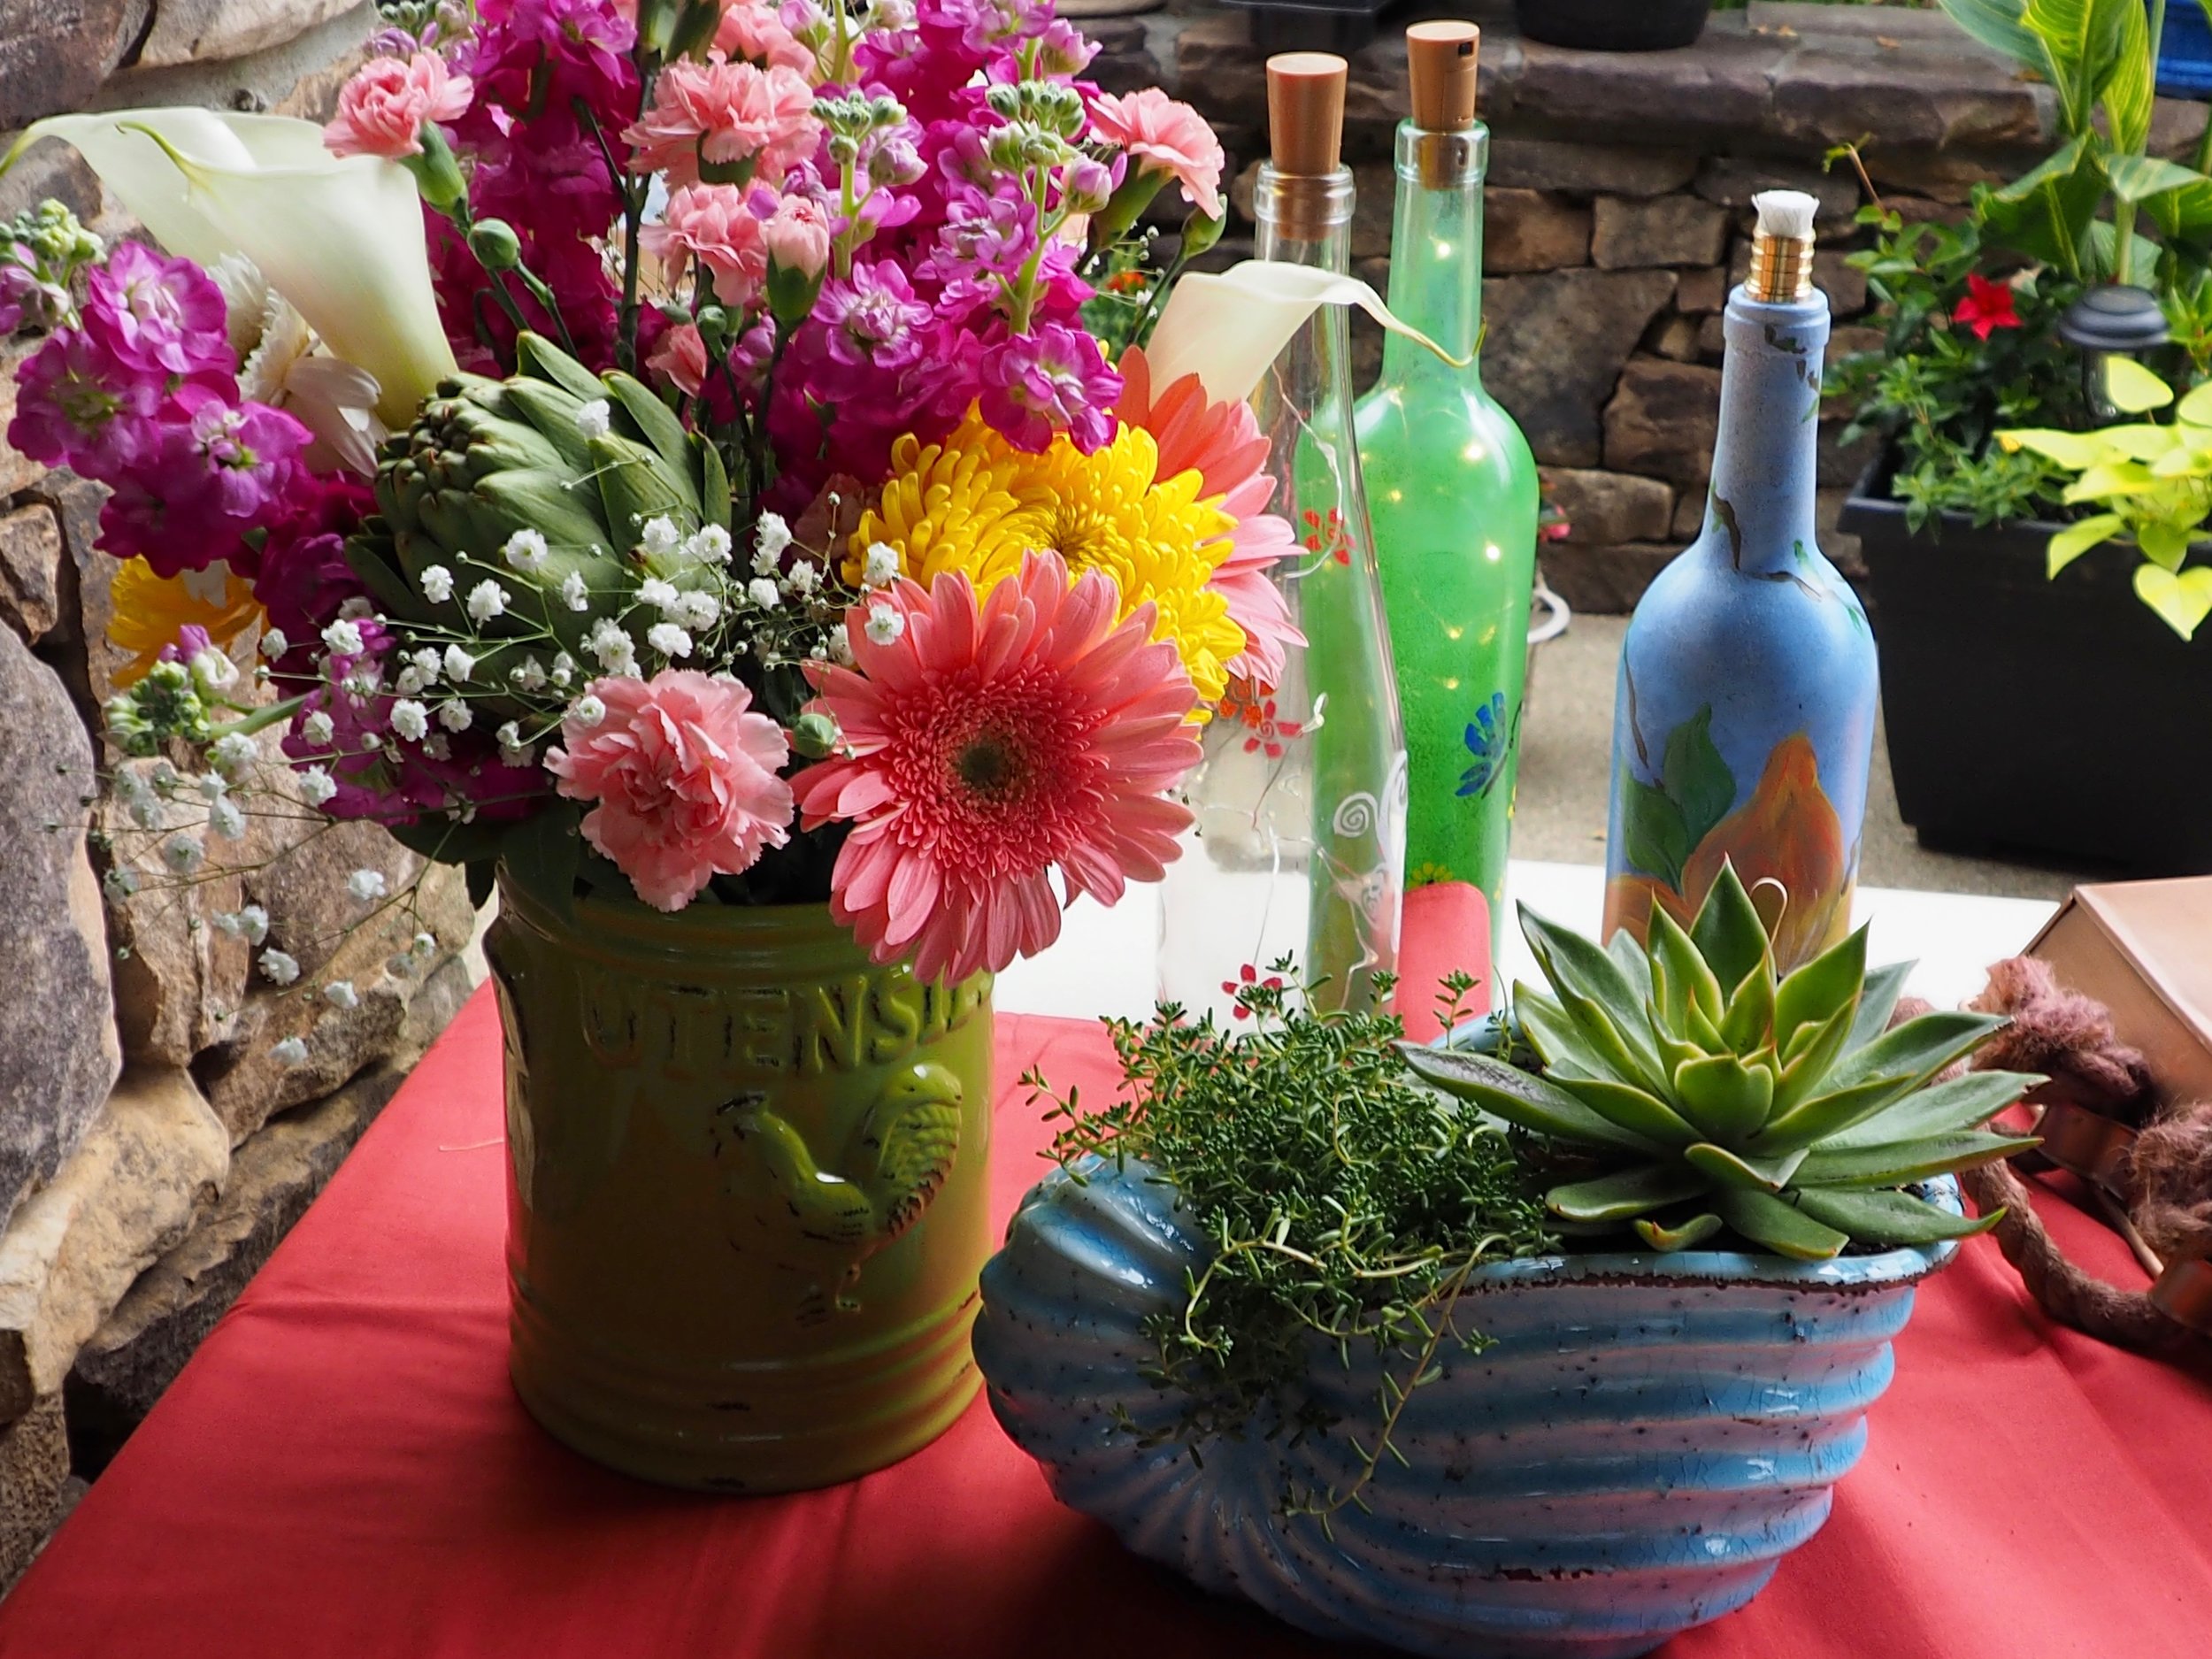  May’s meeting was all about beautiful container gardens and cut flower arrangements. 